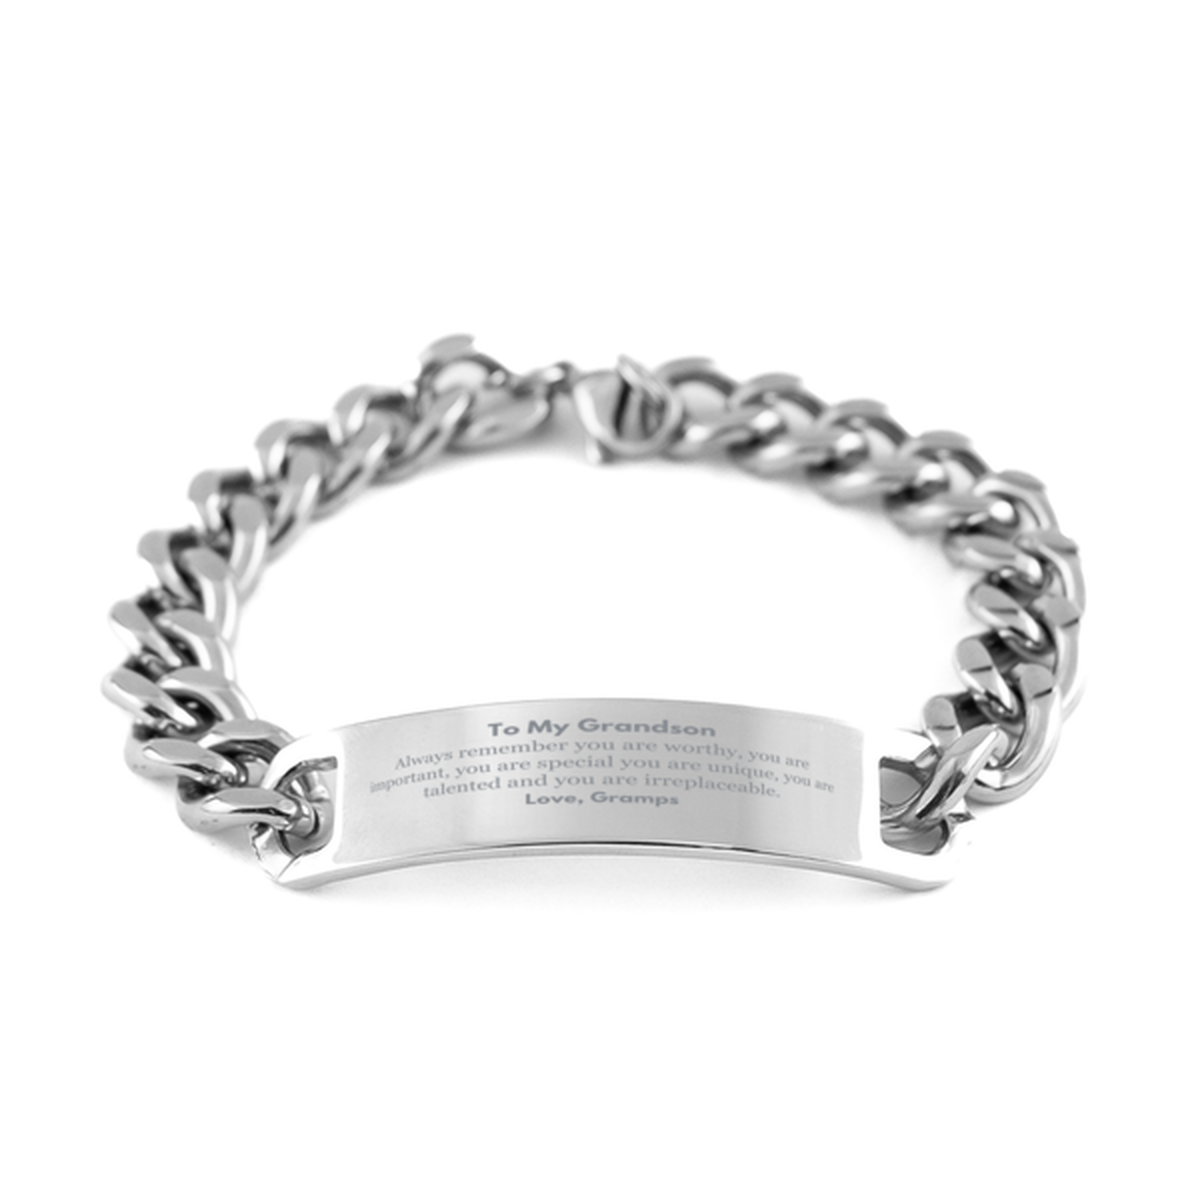 Grandson Birthday Gifts from Gramps, Inspirational Cuban Chain Stainless Steel Bracelet for Grandson Christmas Graduation Gifts for Grandson Always remember you are worthy, you are important. Love, Gramps